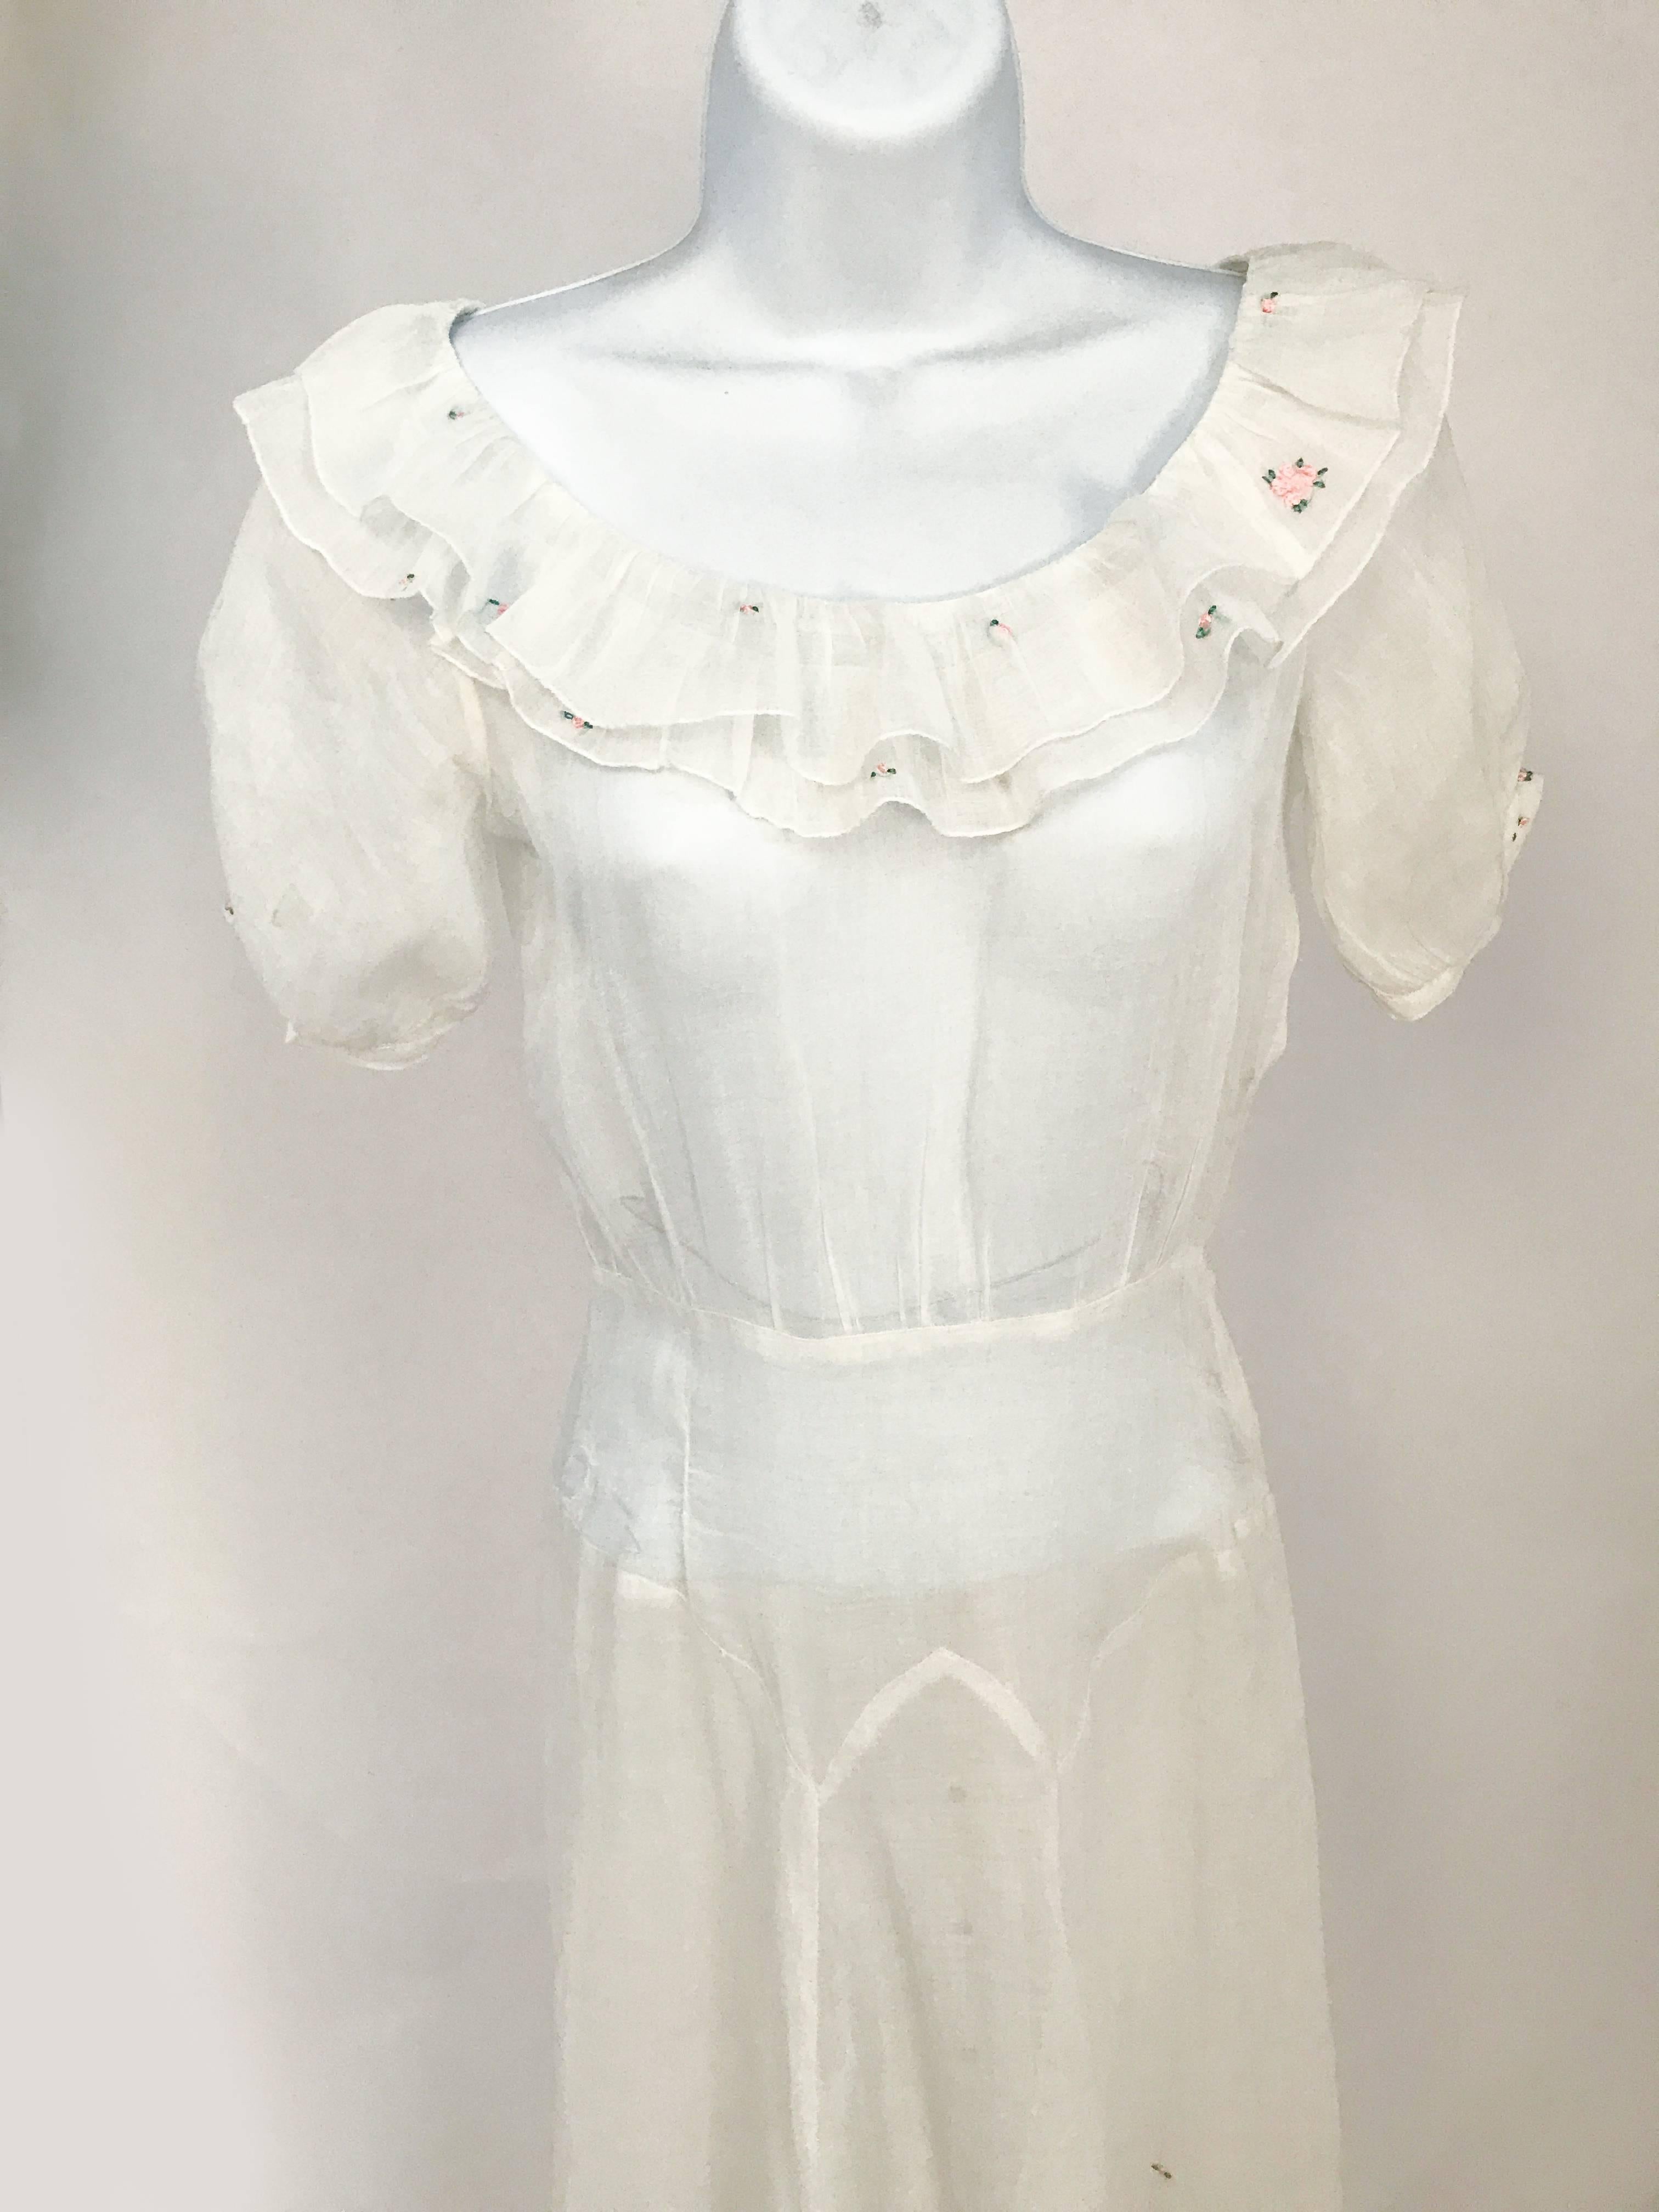 Women's Early 1930s White Cotton Lawn Dress With Rosebud Embroidery